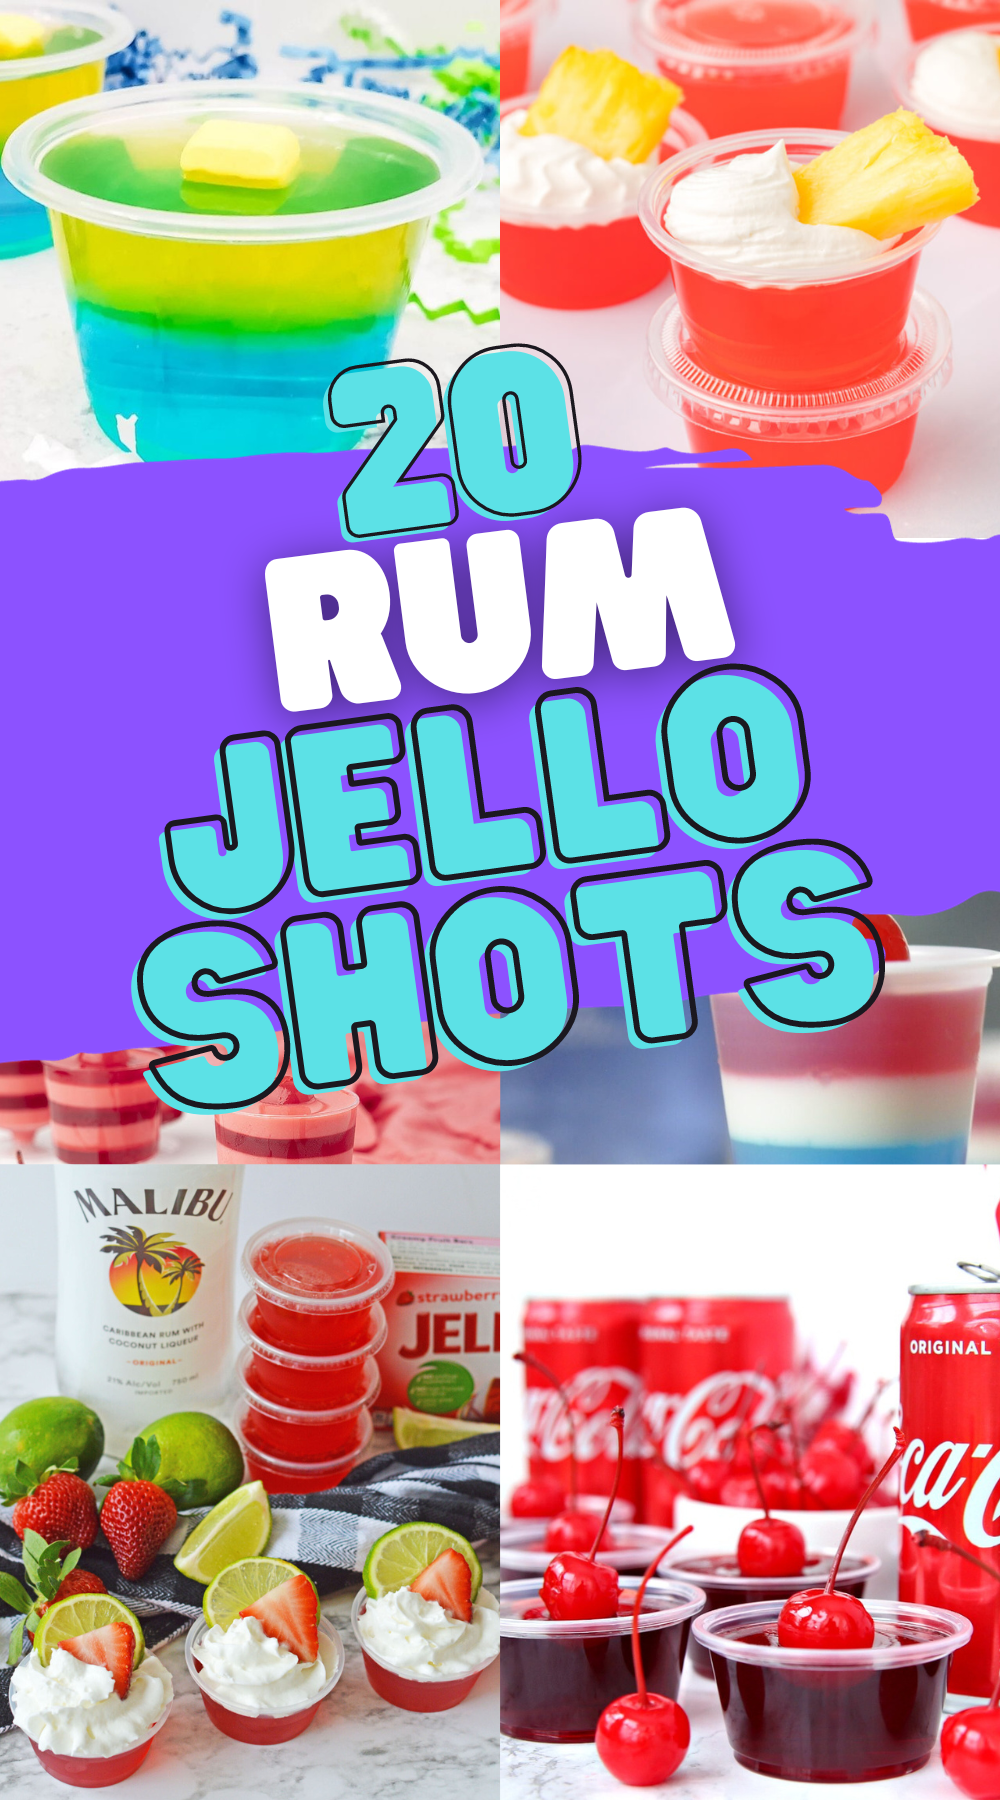 A collage of jello shots made with rum. 20 great rum jello shot recipes.